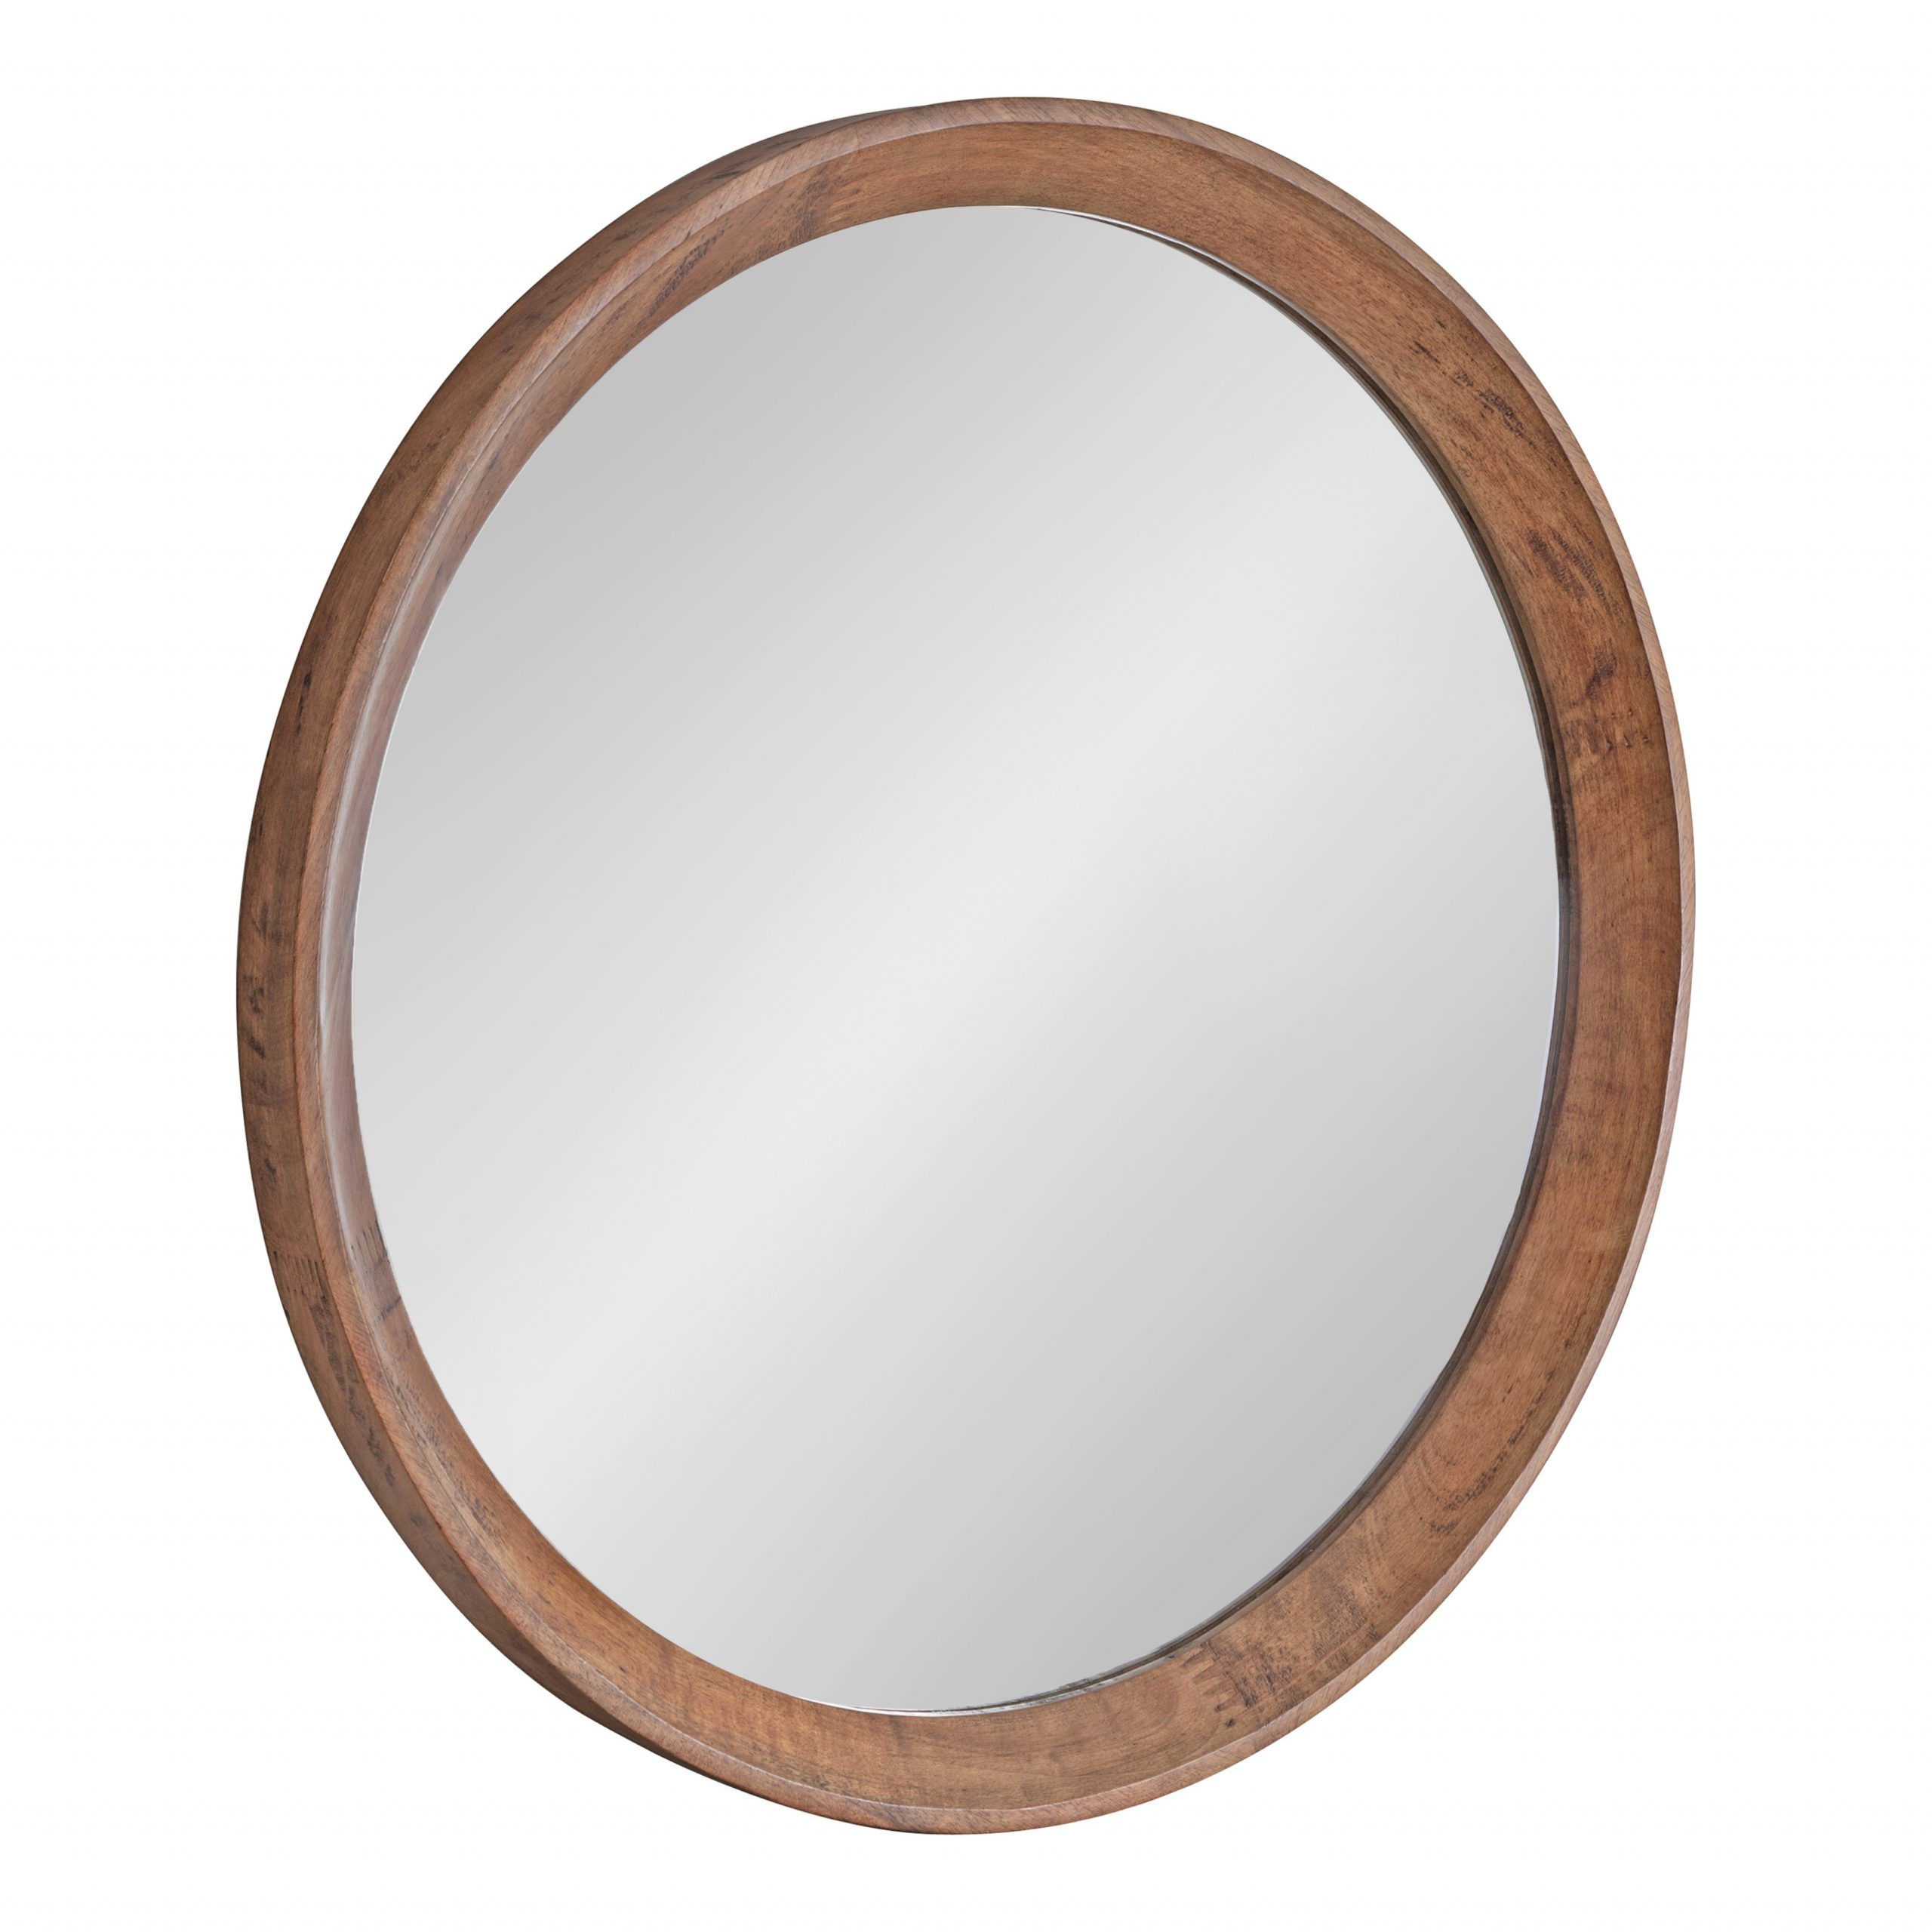 Kate And Laurel Hartman Transitional Round Wood Framed Wall Mirror, 30 With Regard To Mocha Brown Wall Mirrors (View 1 of 15)